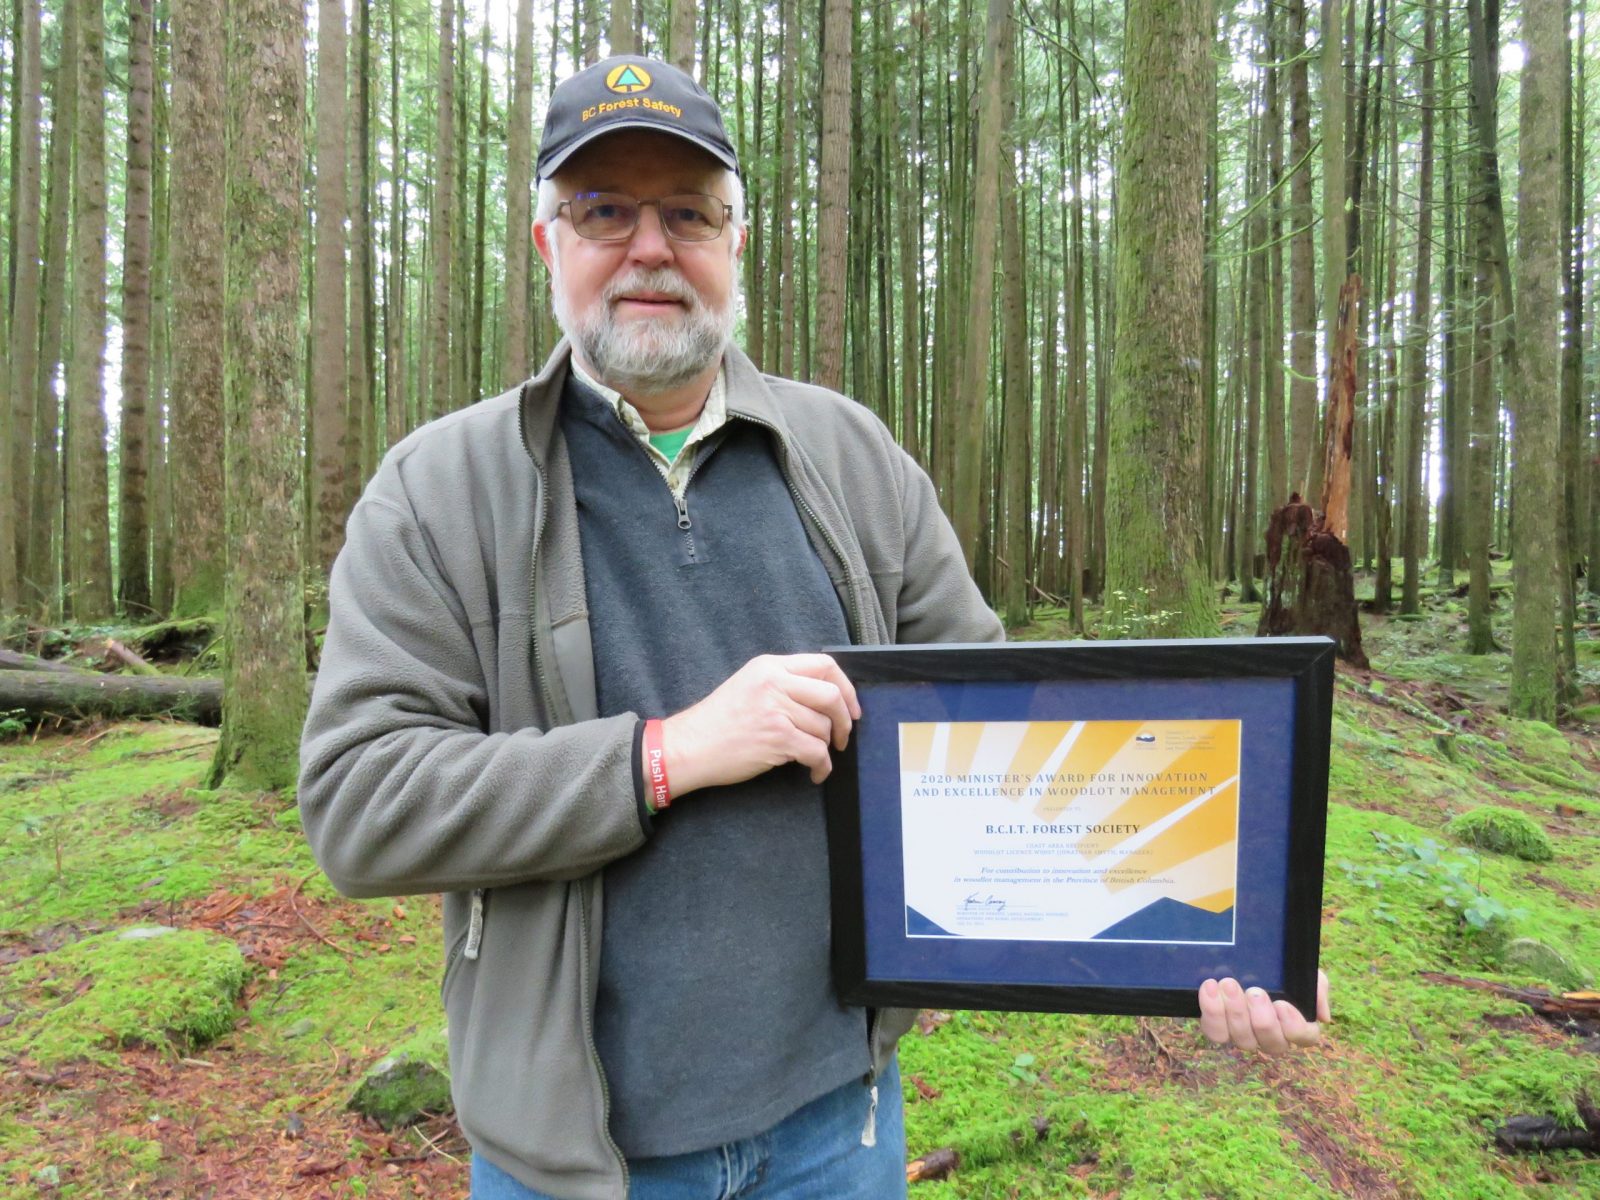 BCIT Forest Society receives Minister’s Award for Innovation and Excellence